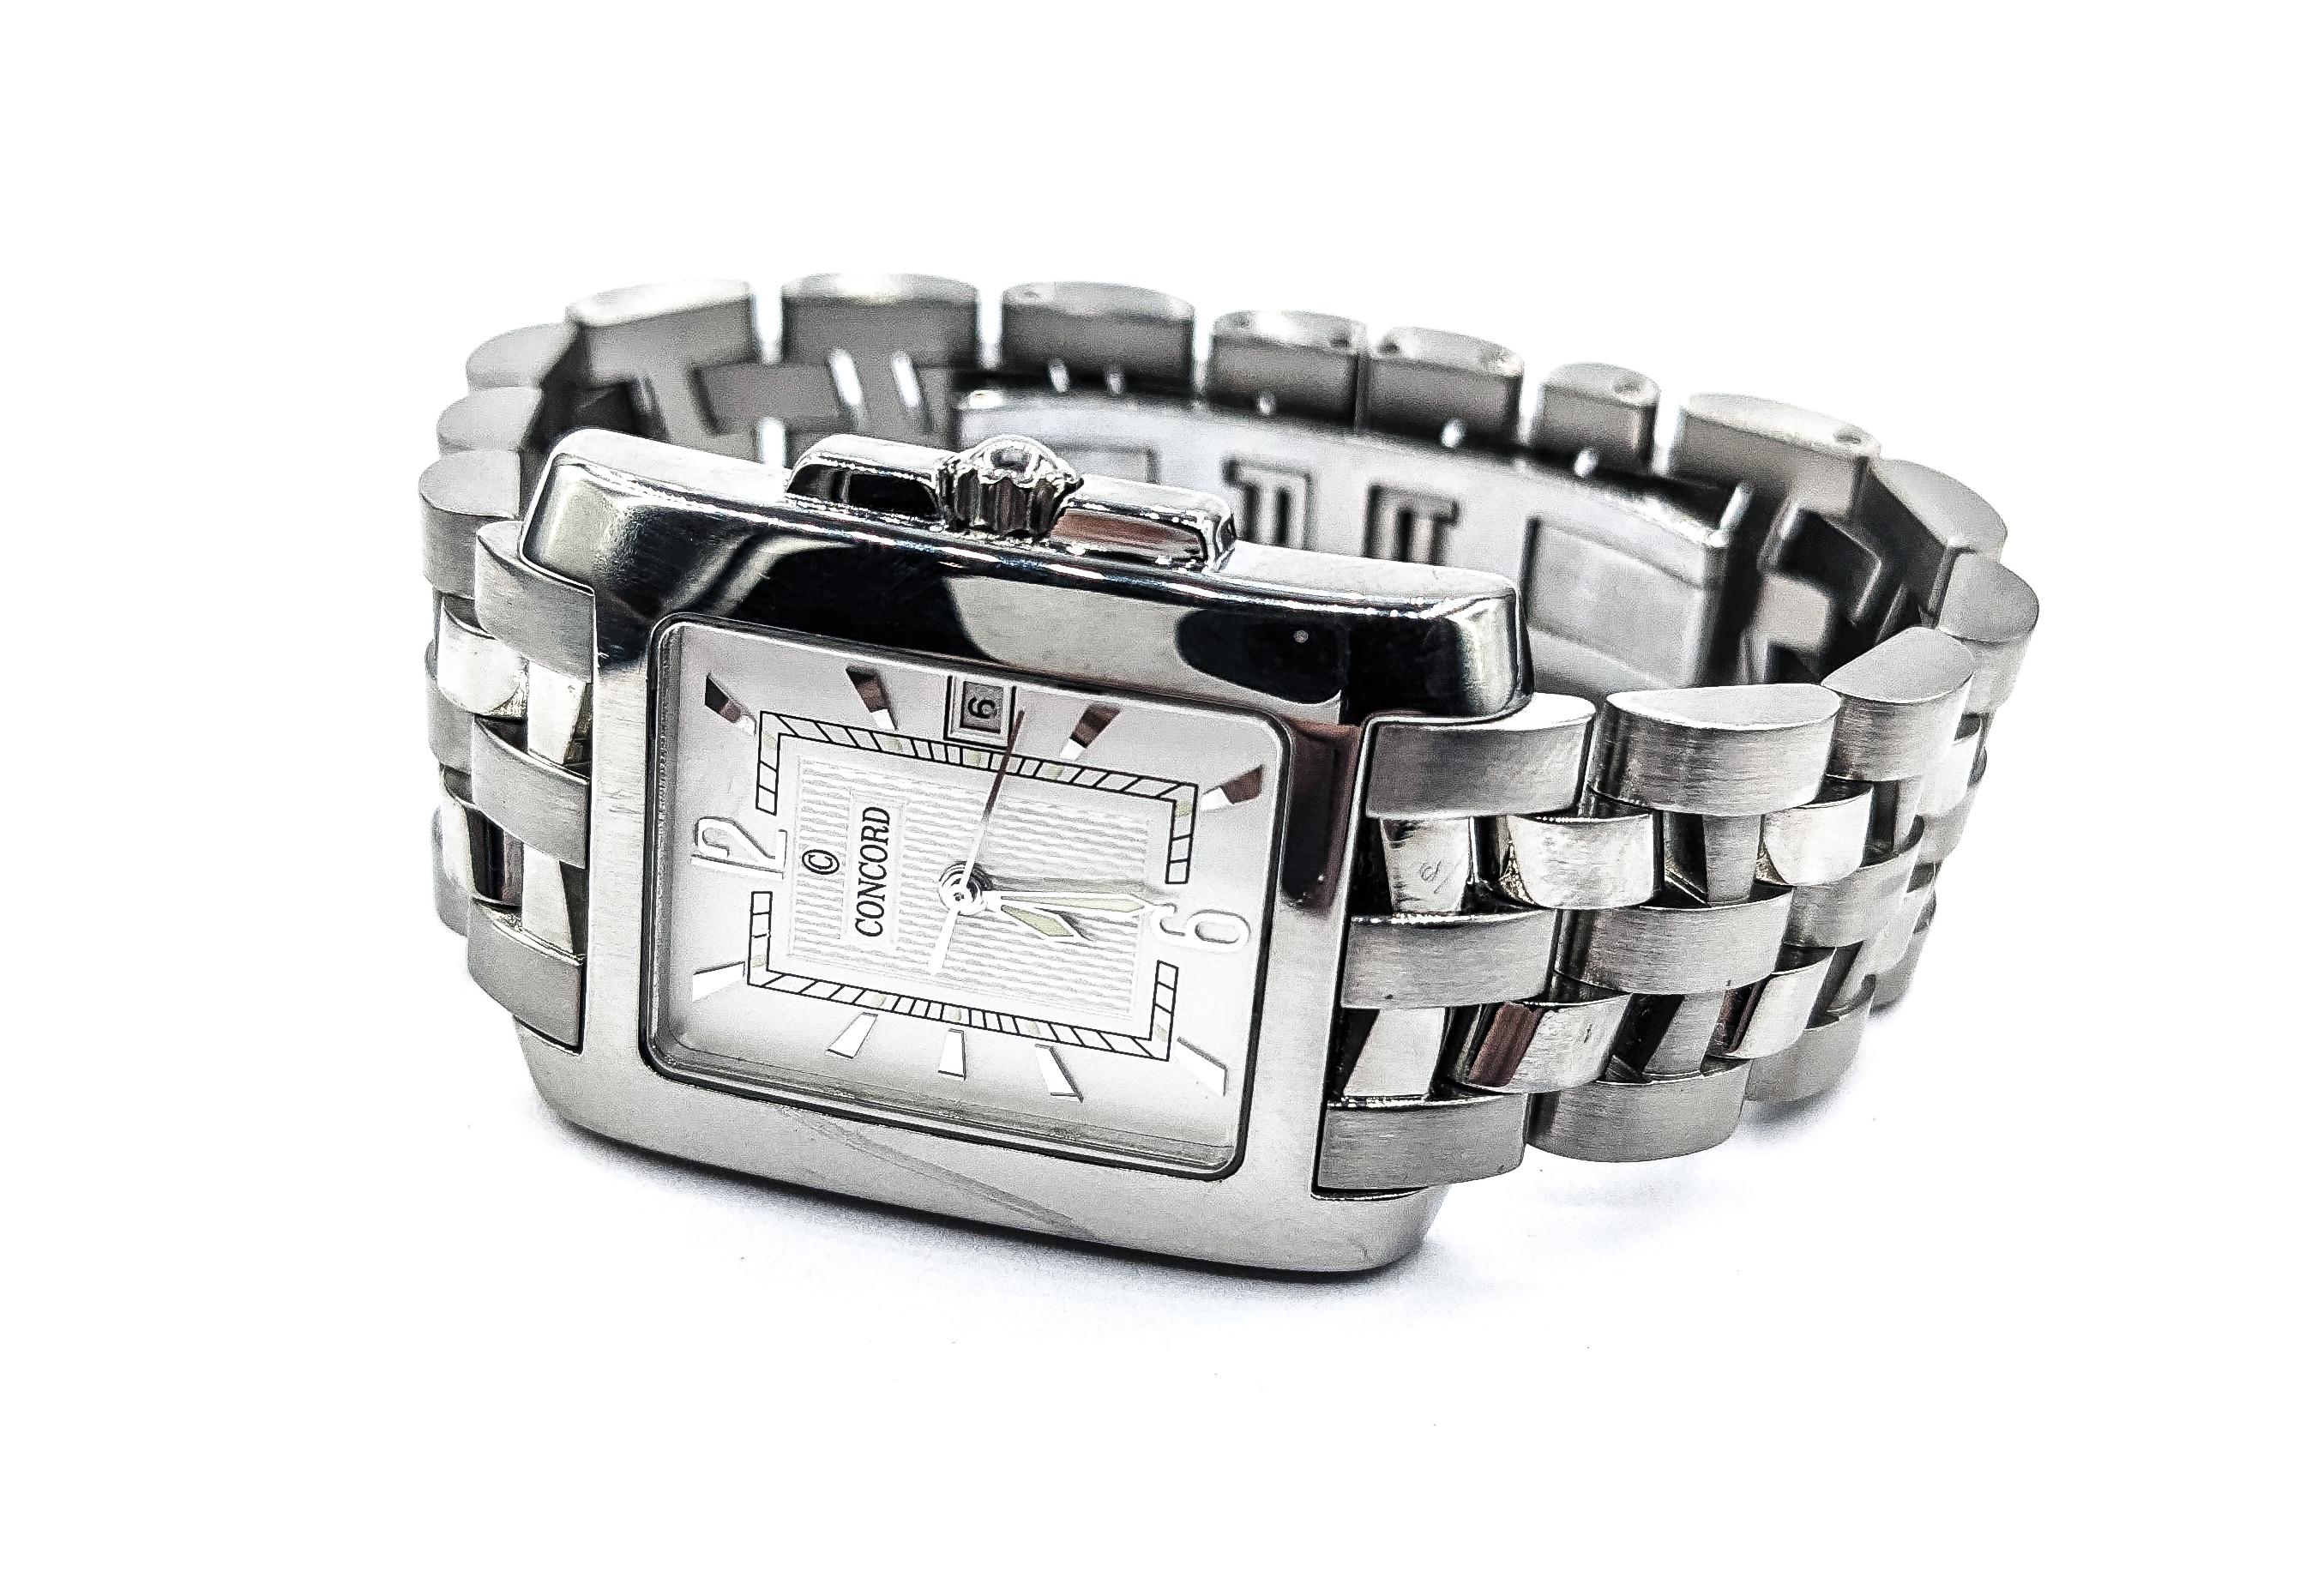 Men's Concord Sportivo Watch In Stainless Steel

Introducing the Concord Sportivo Men's Watch, a statement piece that marries functionality with sleek design. Crafted from durable stainless steel, this watch features a quartz movement, ensuring